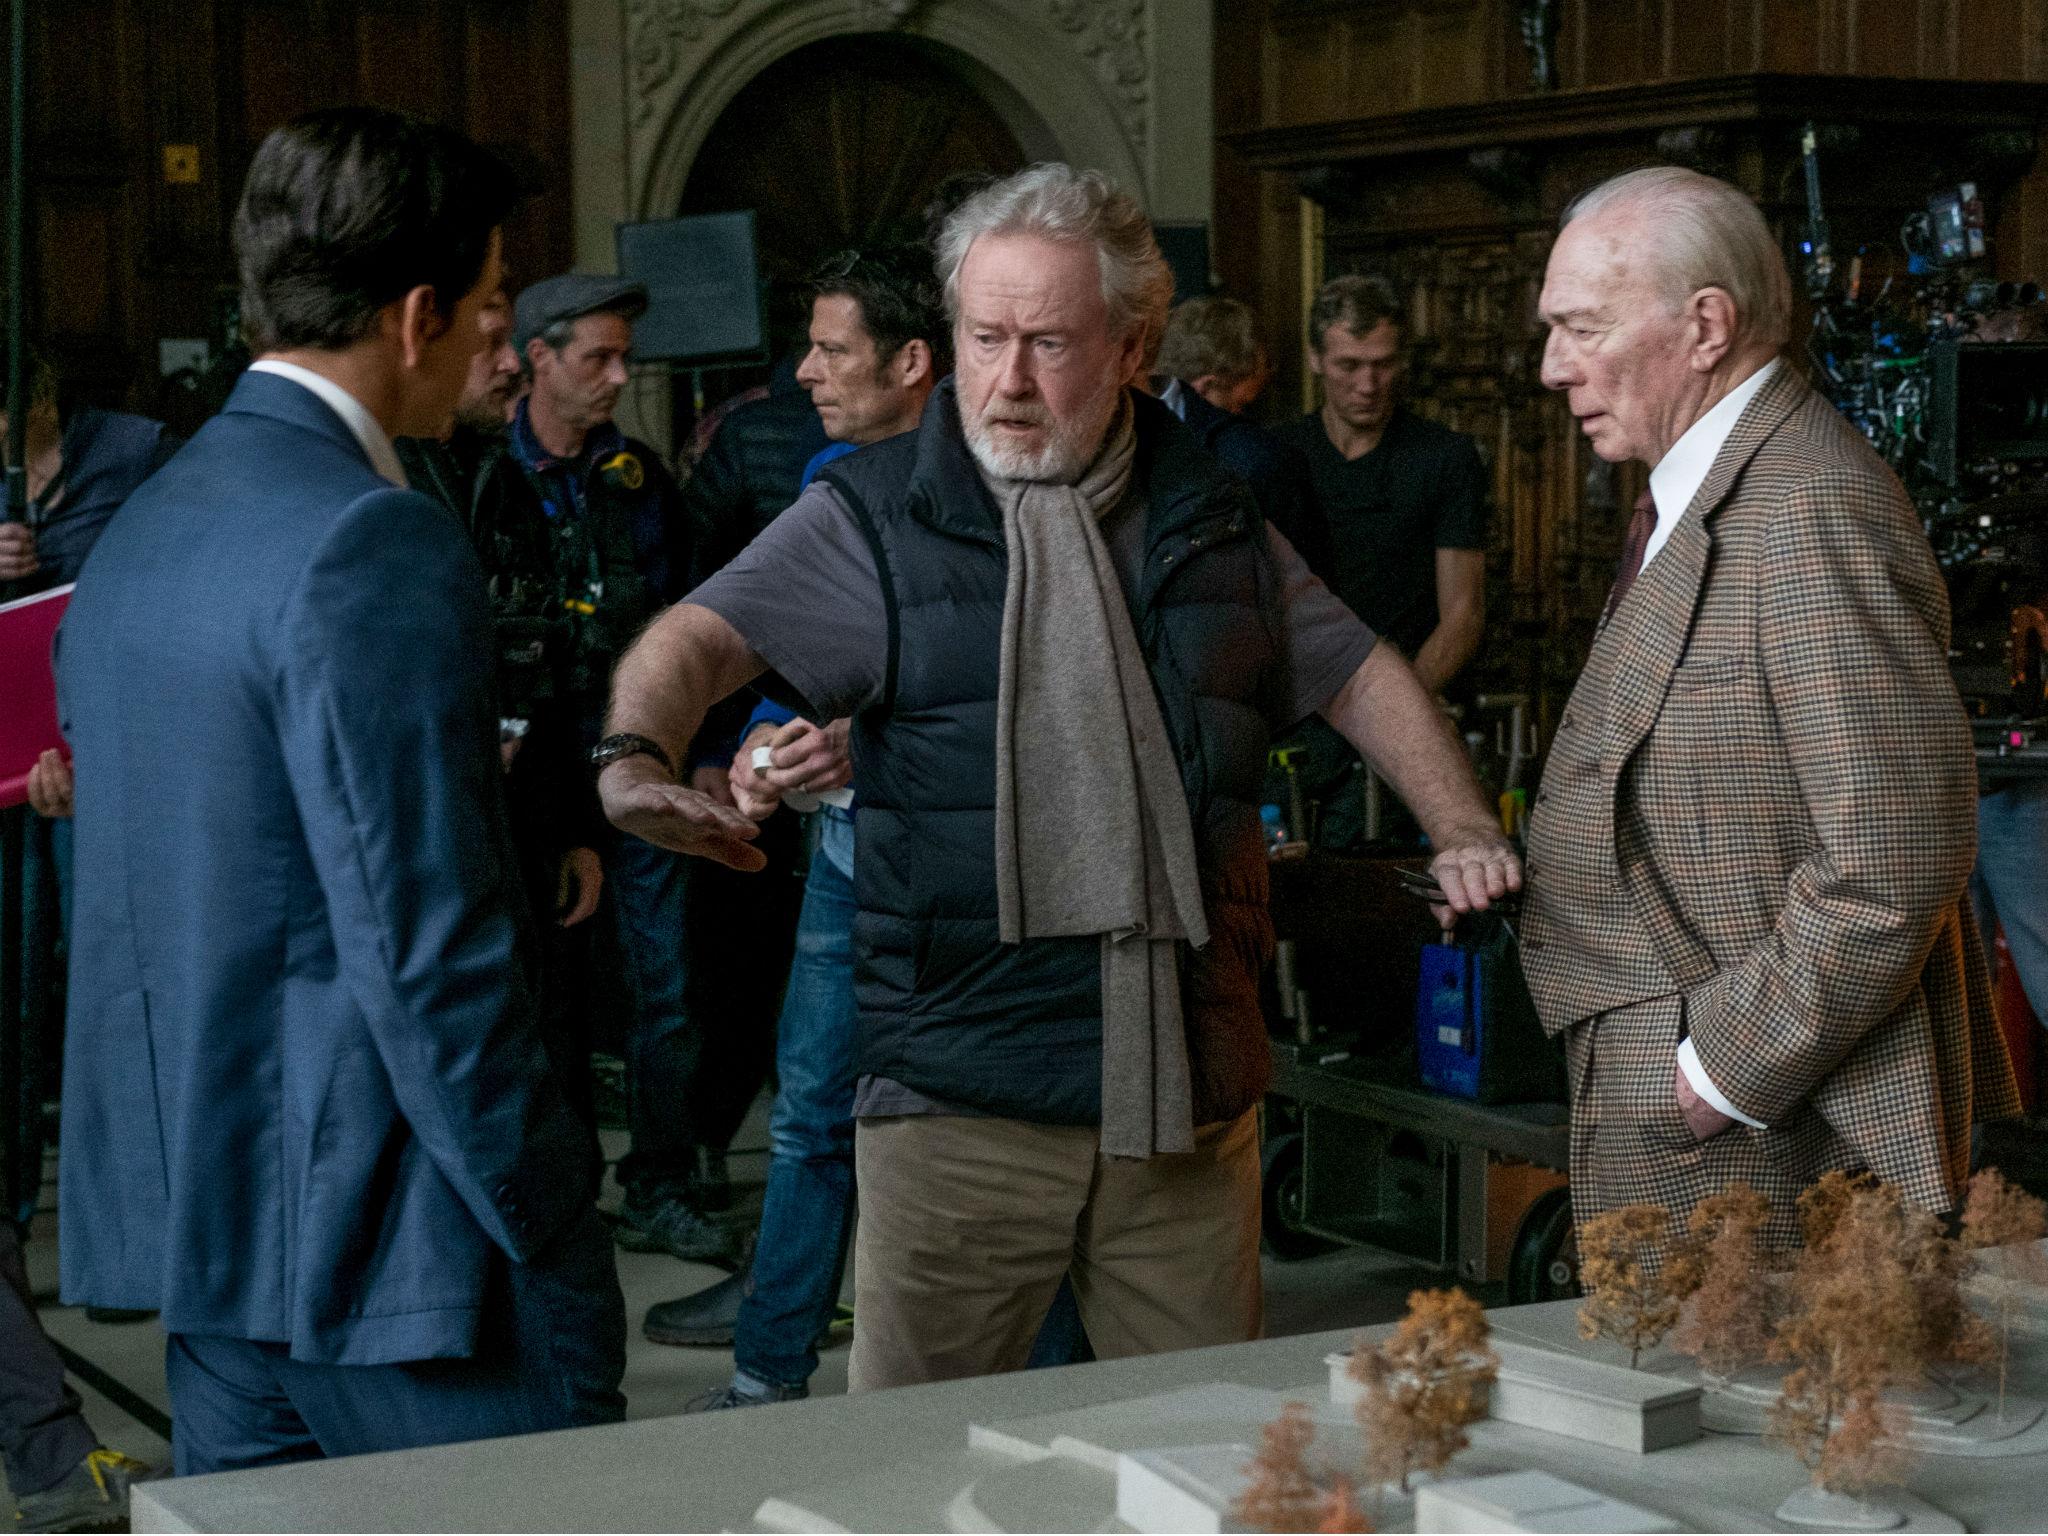 Mark Wahlberg, Scott and Plummer on the set of ‘All the Money in the World’